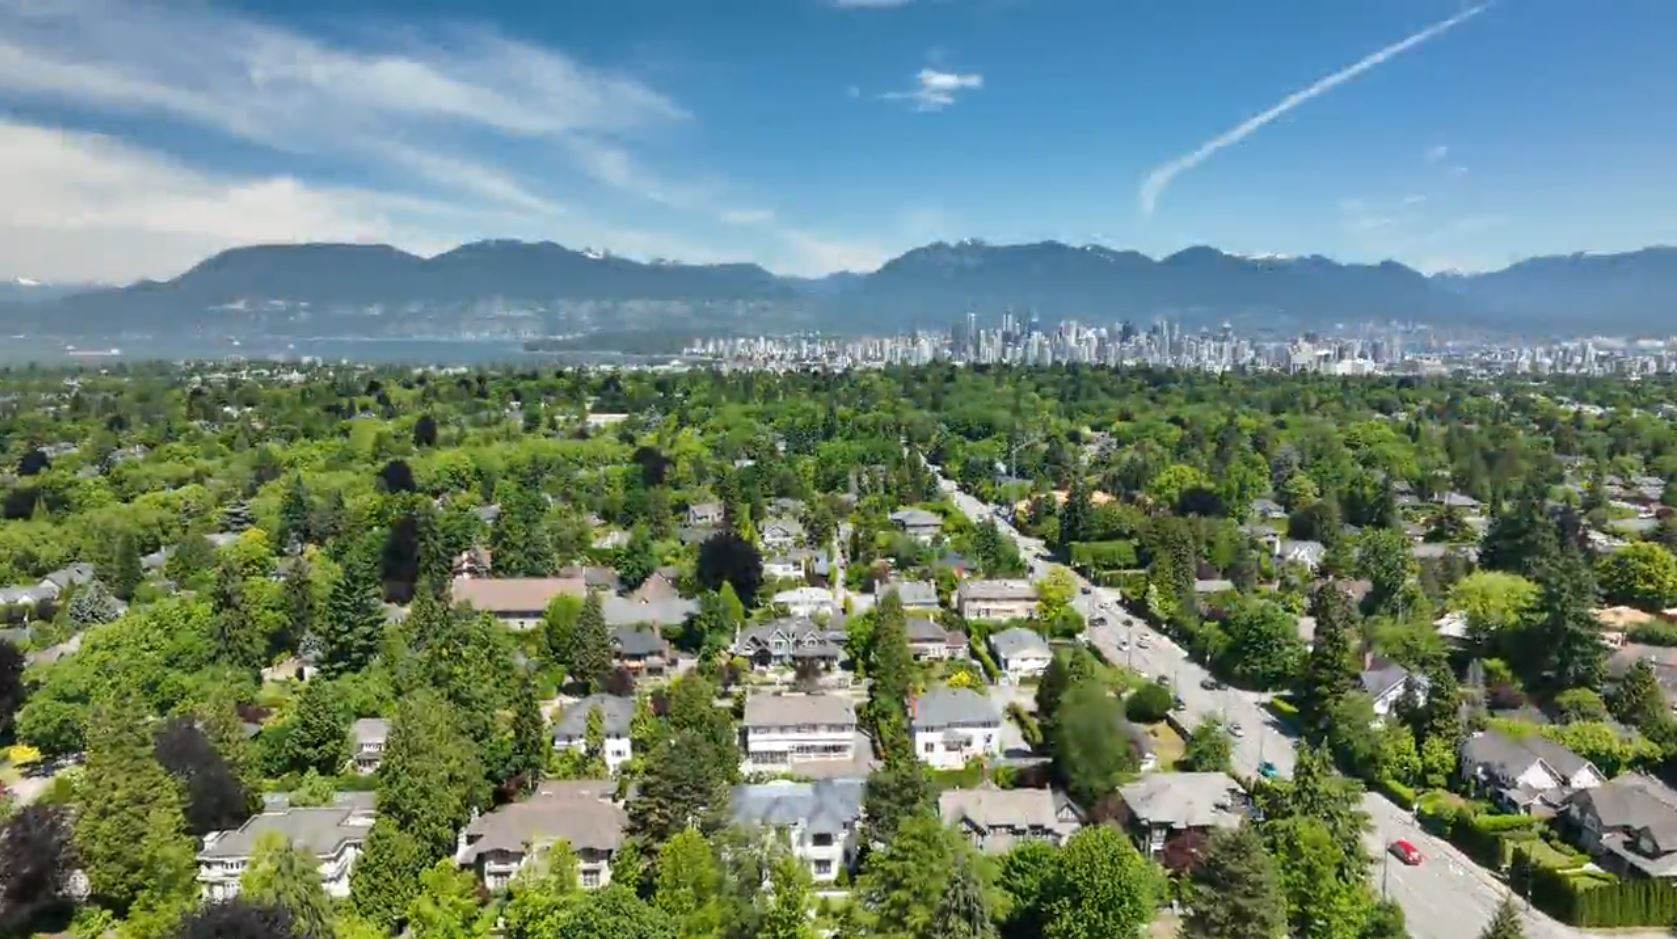 City council looking at denser housing in Vancouver’s Shaughnessy
neighbourhood